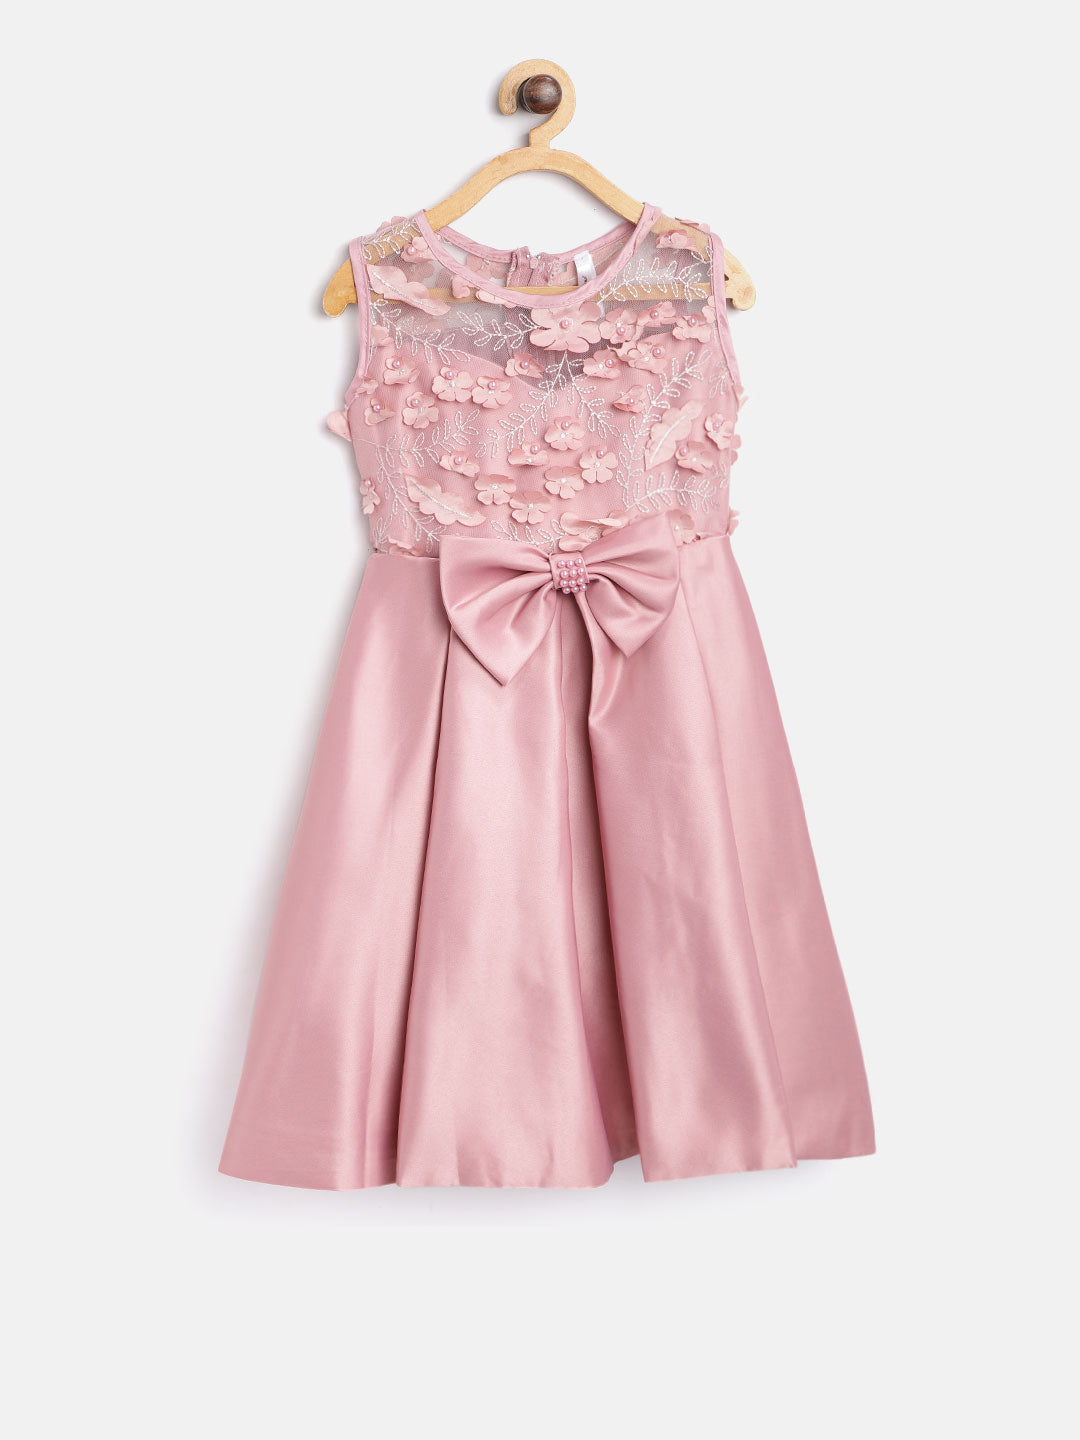 Gilr's Blue Pearls And Embroidered Party Dress - StyleStone Kid